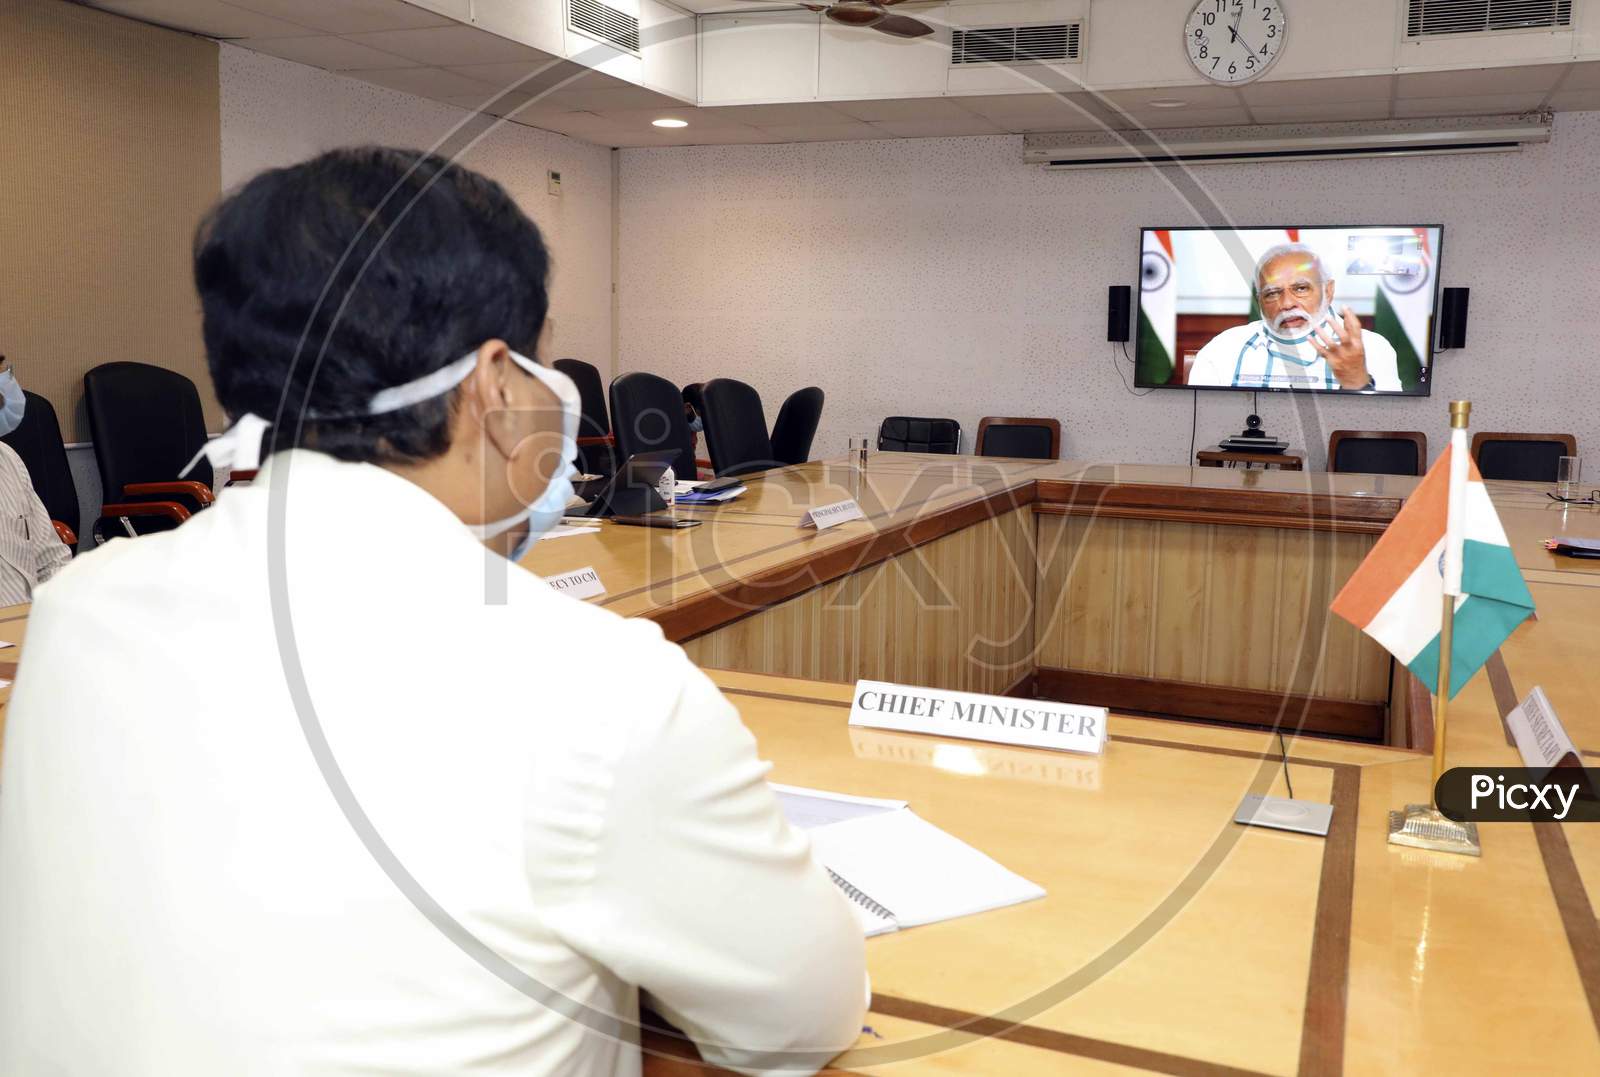 Assam Chief Minister Sarbananda Sonowal Attending The Prime Minister's  Video Conference With Chief Ministers About Nationwide Lockdown Amidst Coronavirus Or COVID-19 Outbreak  In Guwahati  On April 27,2020